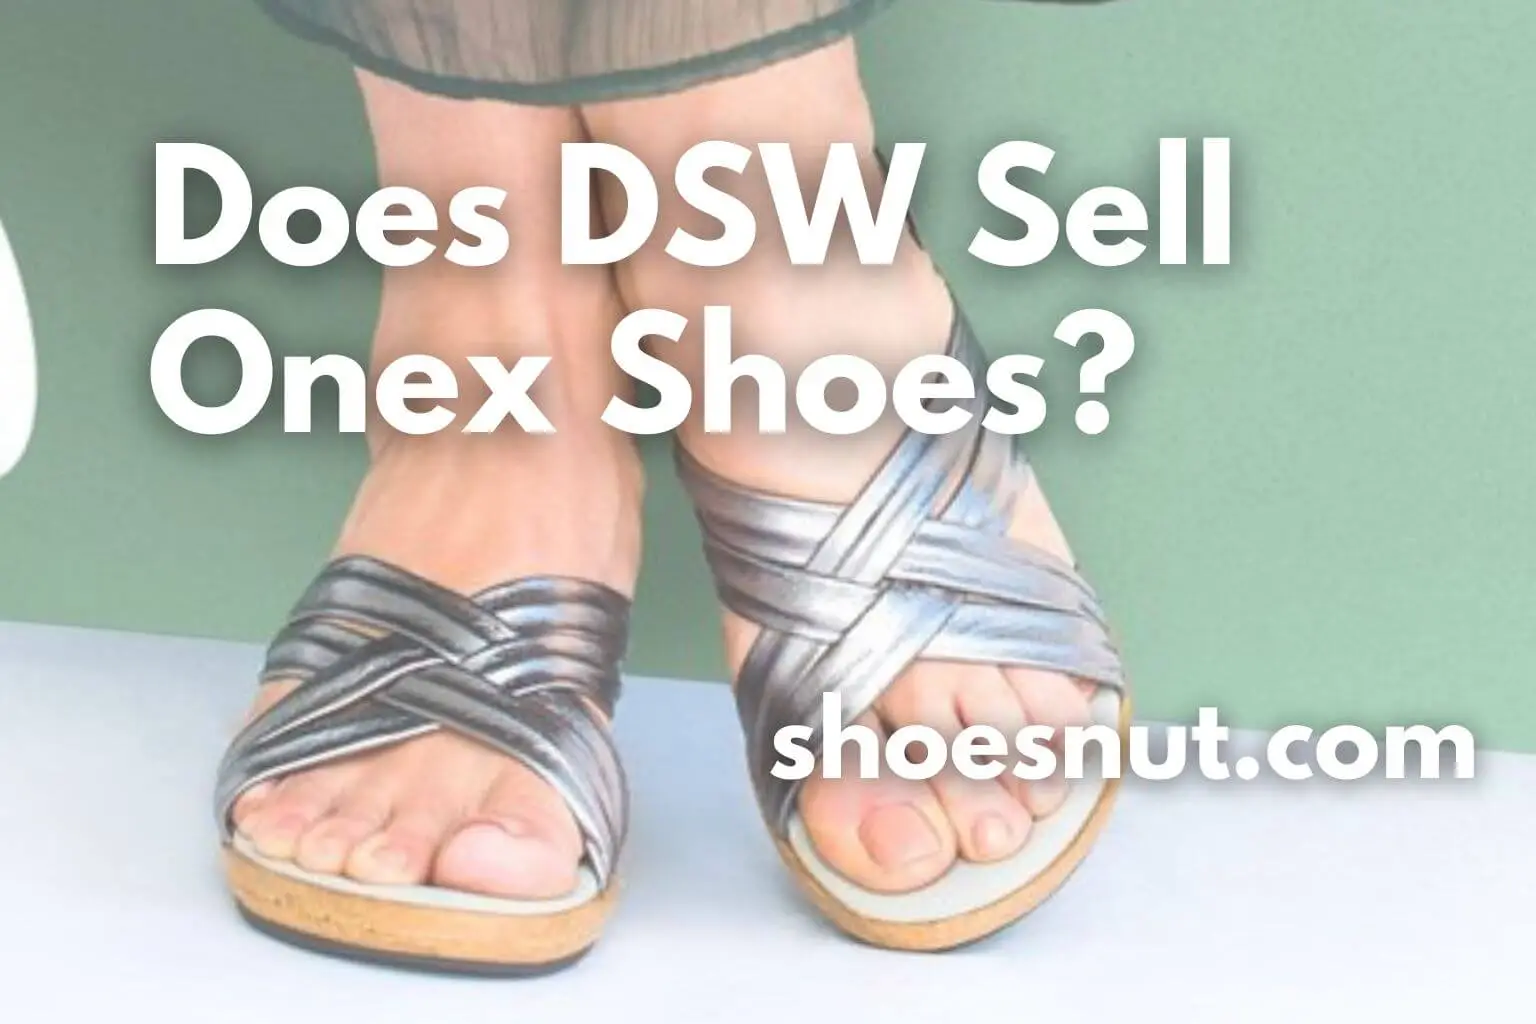 Does DSW Sell Onex Shoes?